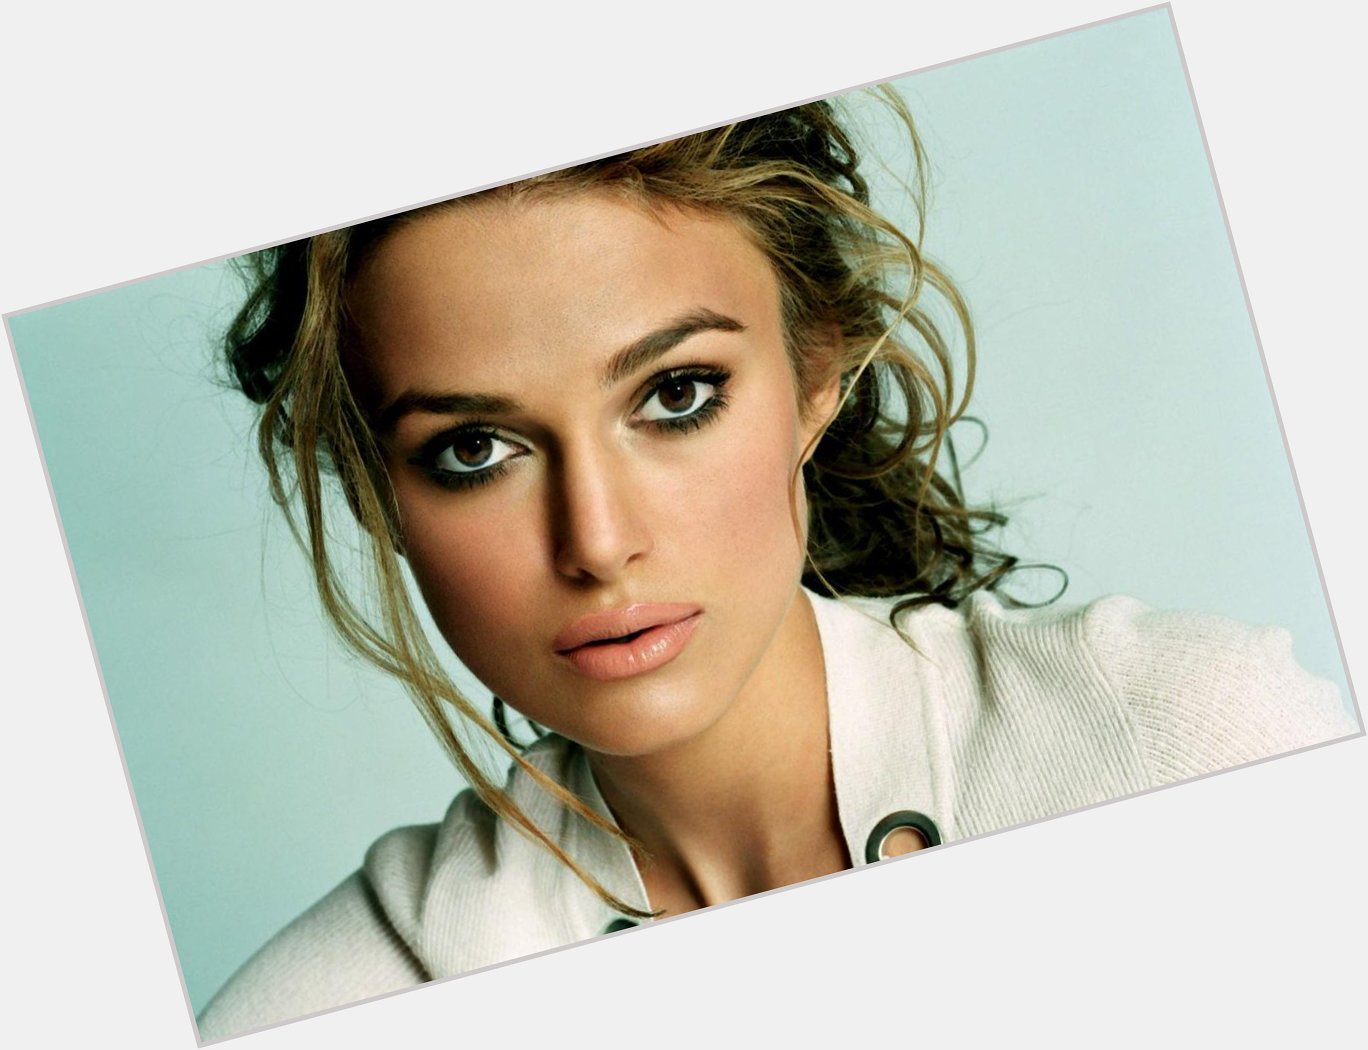 Happy Bday to Keira Knightley, an amazing actress  